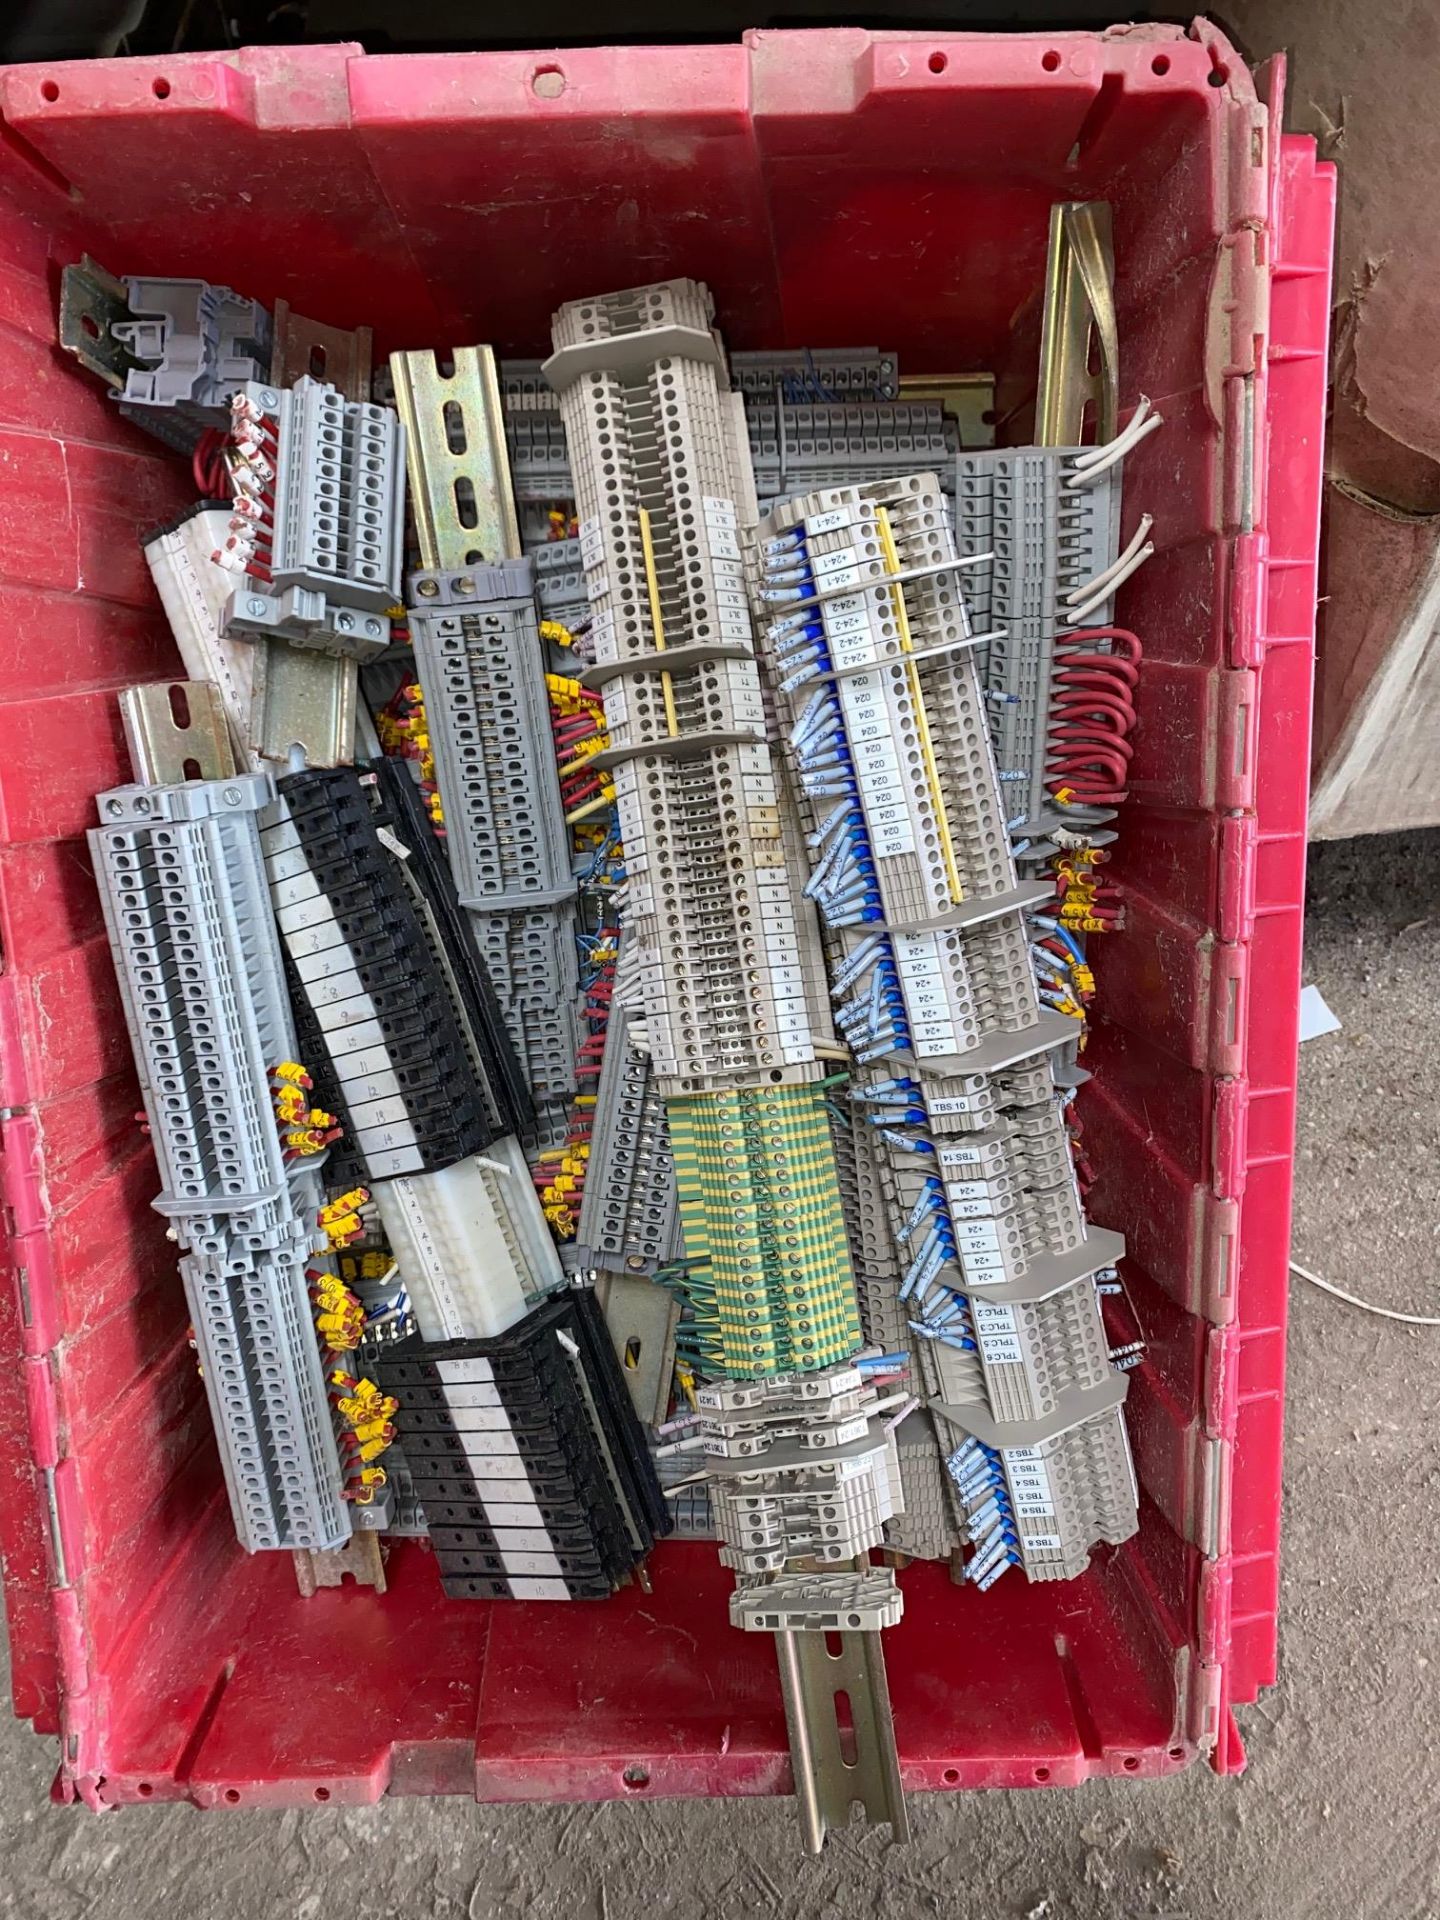 LOT CONSISTING OF COMMUNICATION WIRES, WATER PUMPS, DISTRIBUTORS, DIN CONNECTORS, TOOL BALANCER - Image 13 of 13